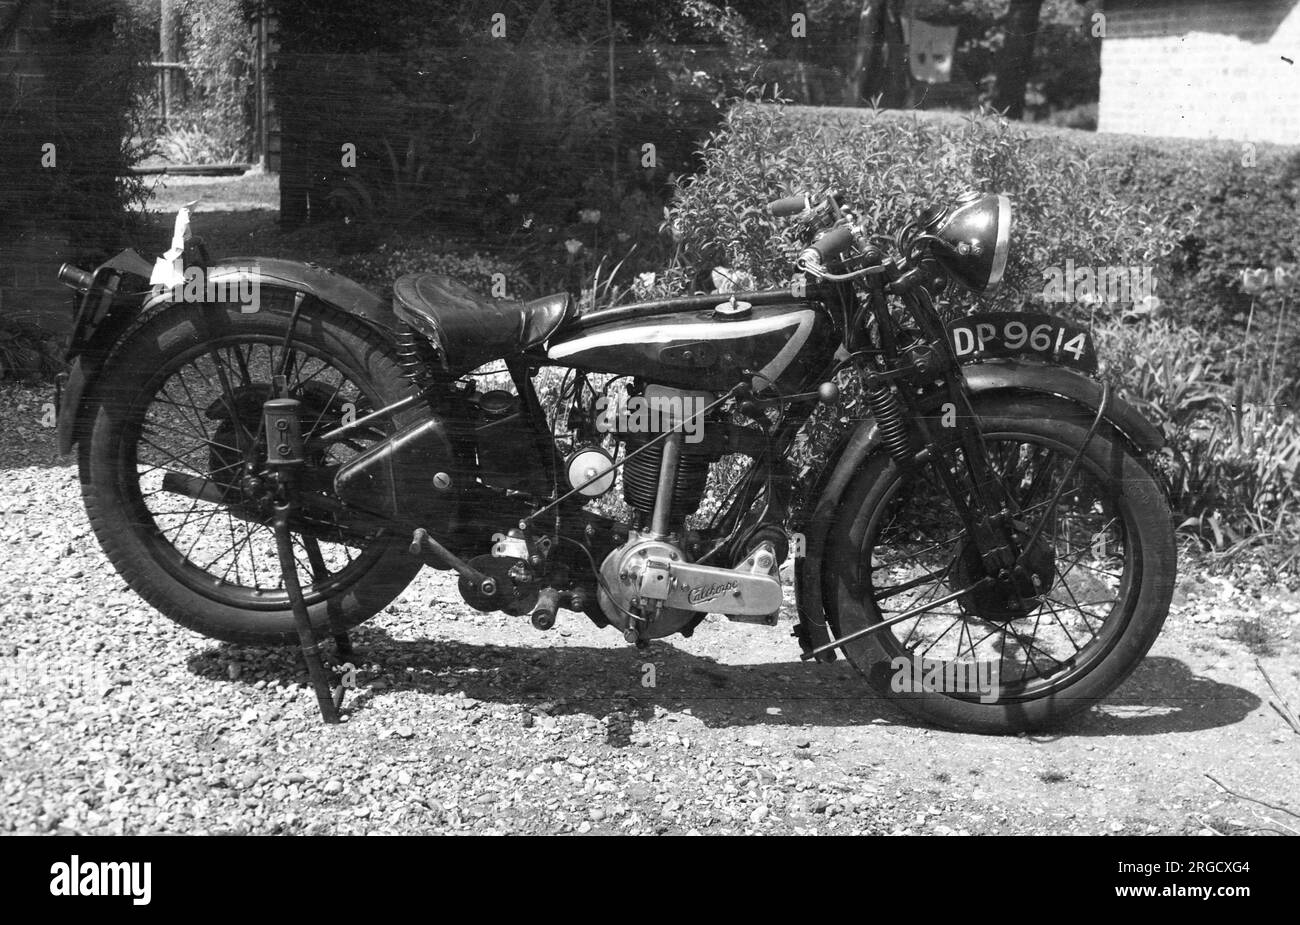 Calthorpe 350 cc. motorcycle, (first registered in Reading about July 1928). Stock Photo